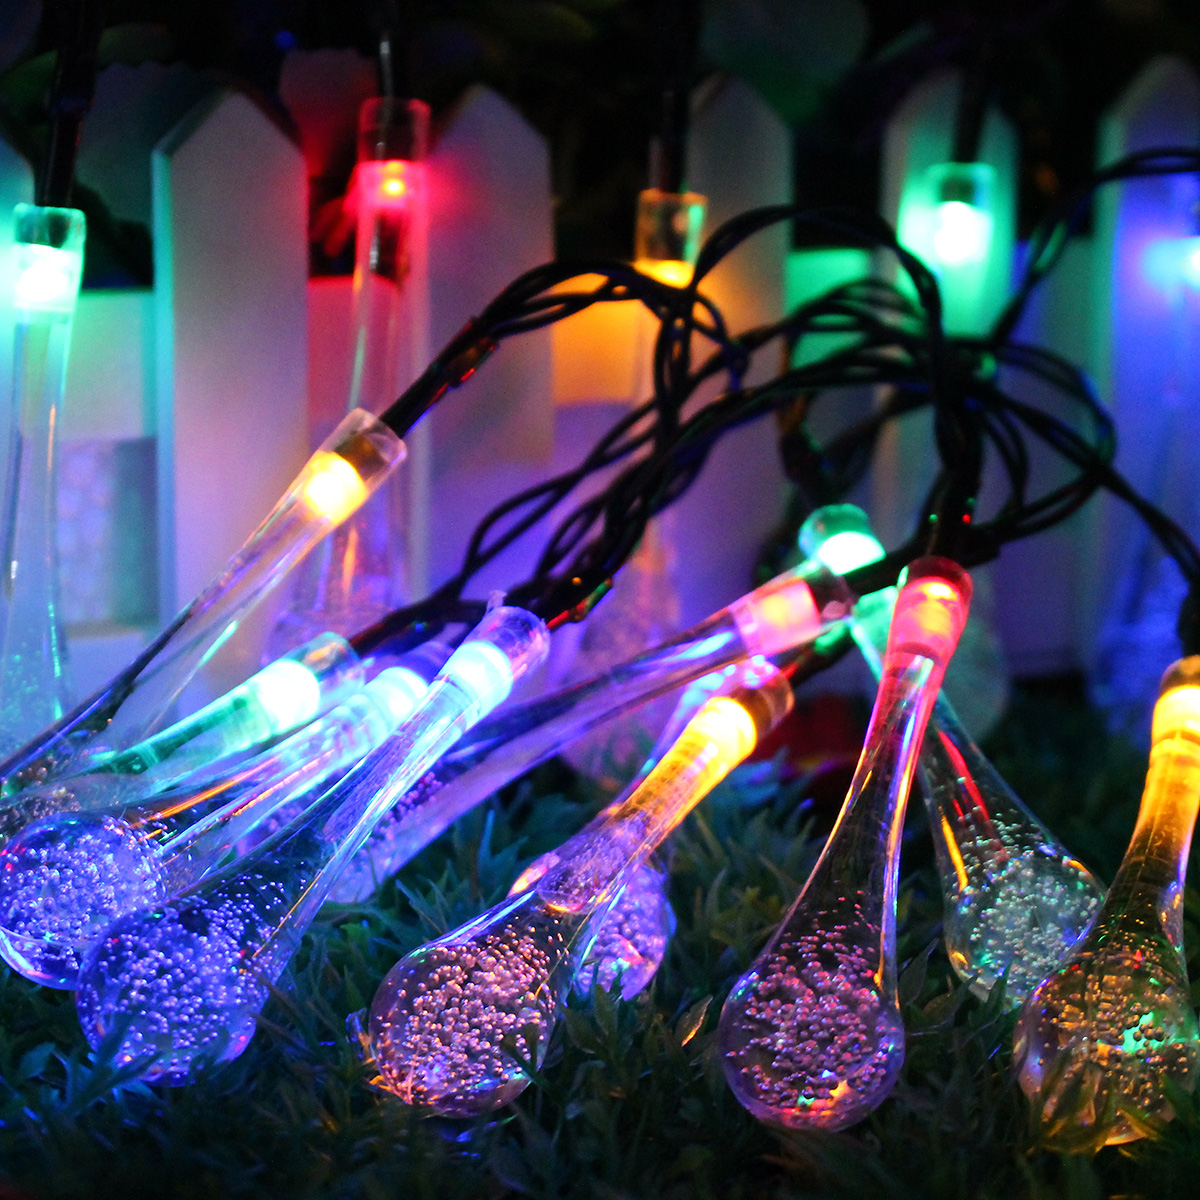 Solar-Powered-Outdoor-50-LED-Droplet-Fairy-String-Light-Wedding-Christmas-Party-Home-Decor-Lamp-DC3V-1162583-7